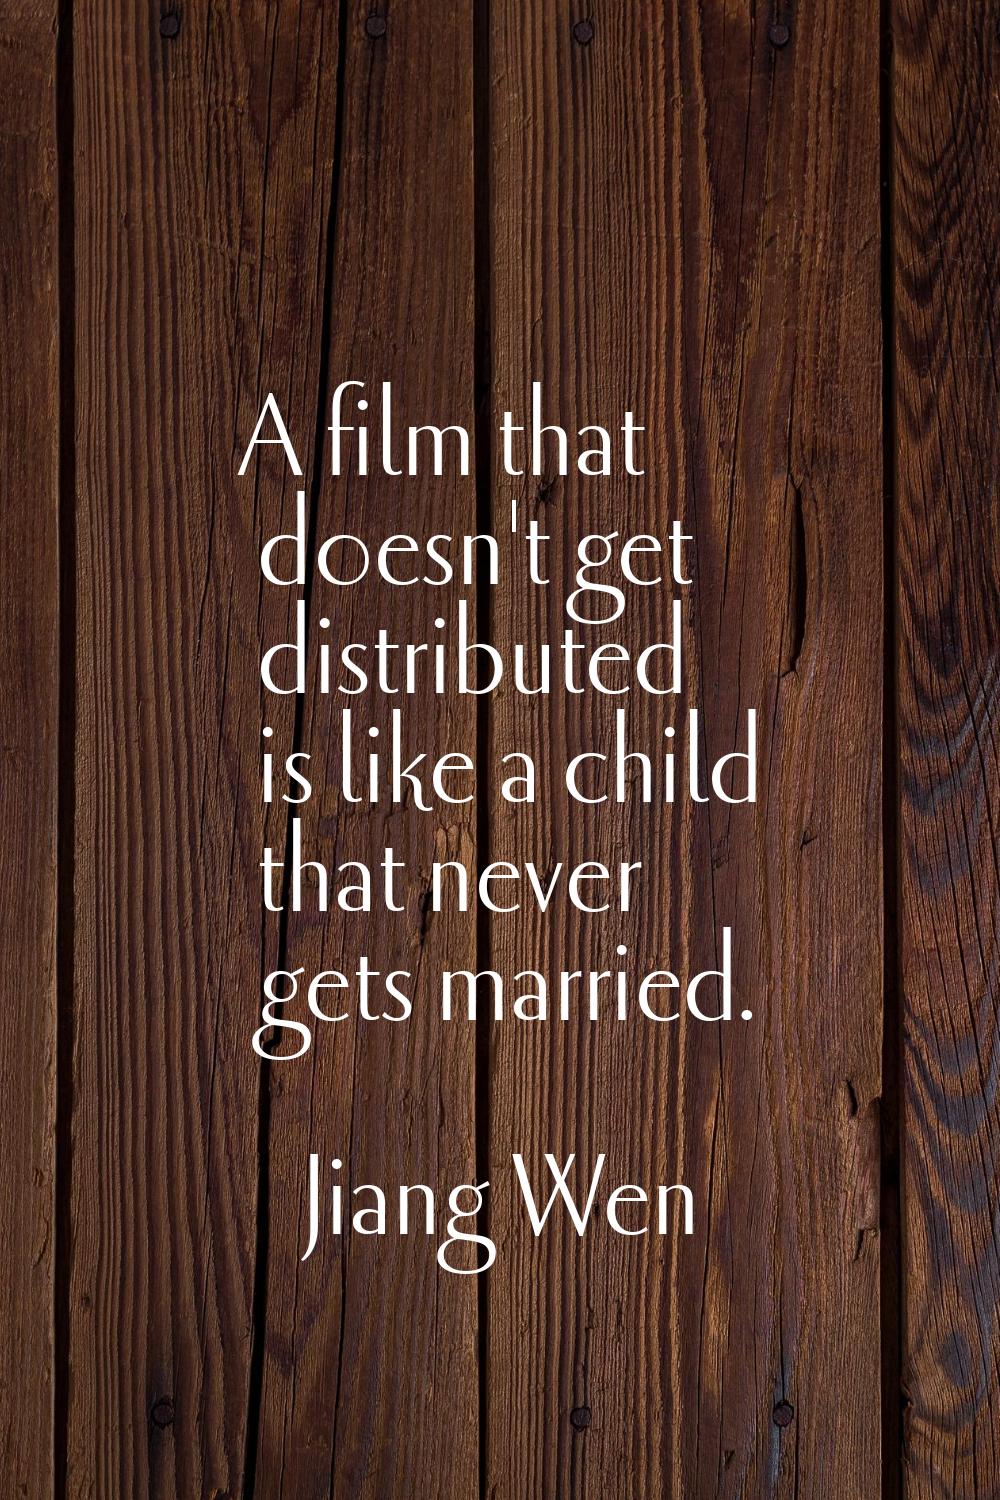 A film that doesn't get distributed is like a child that never gets married.